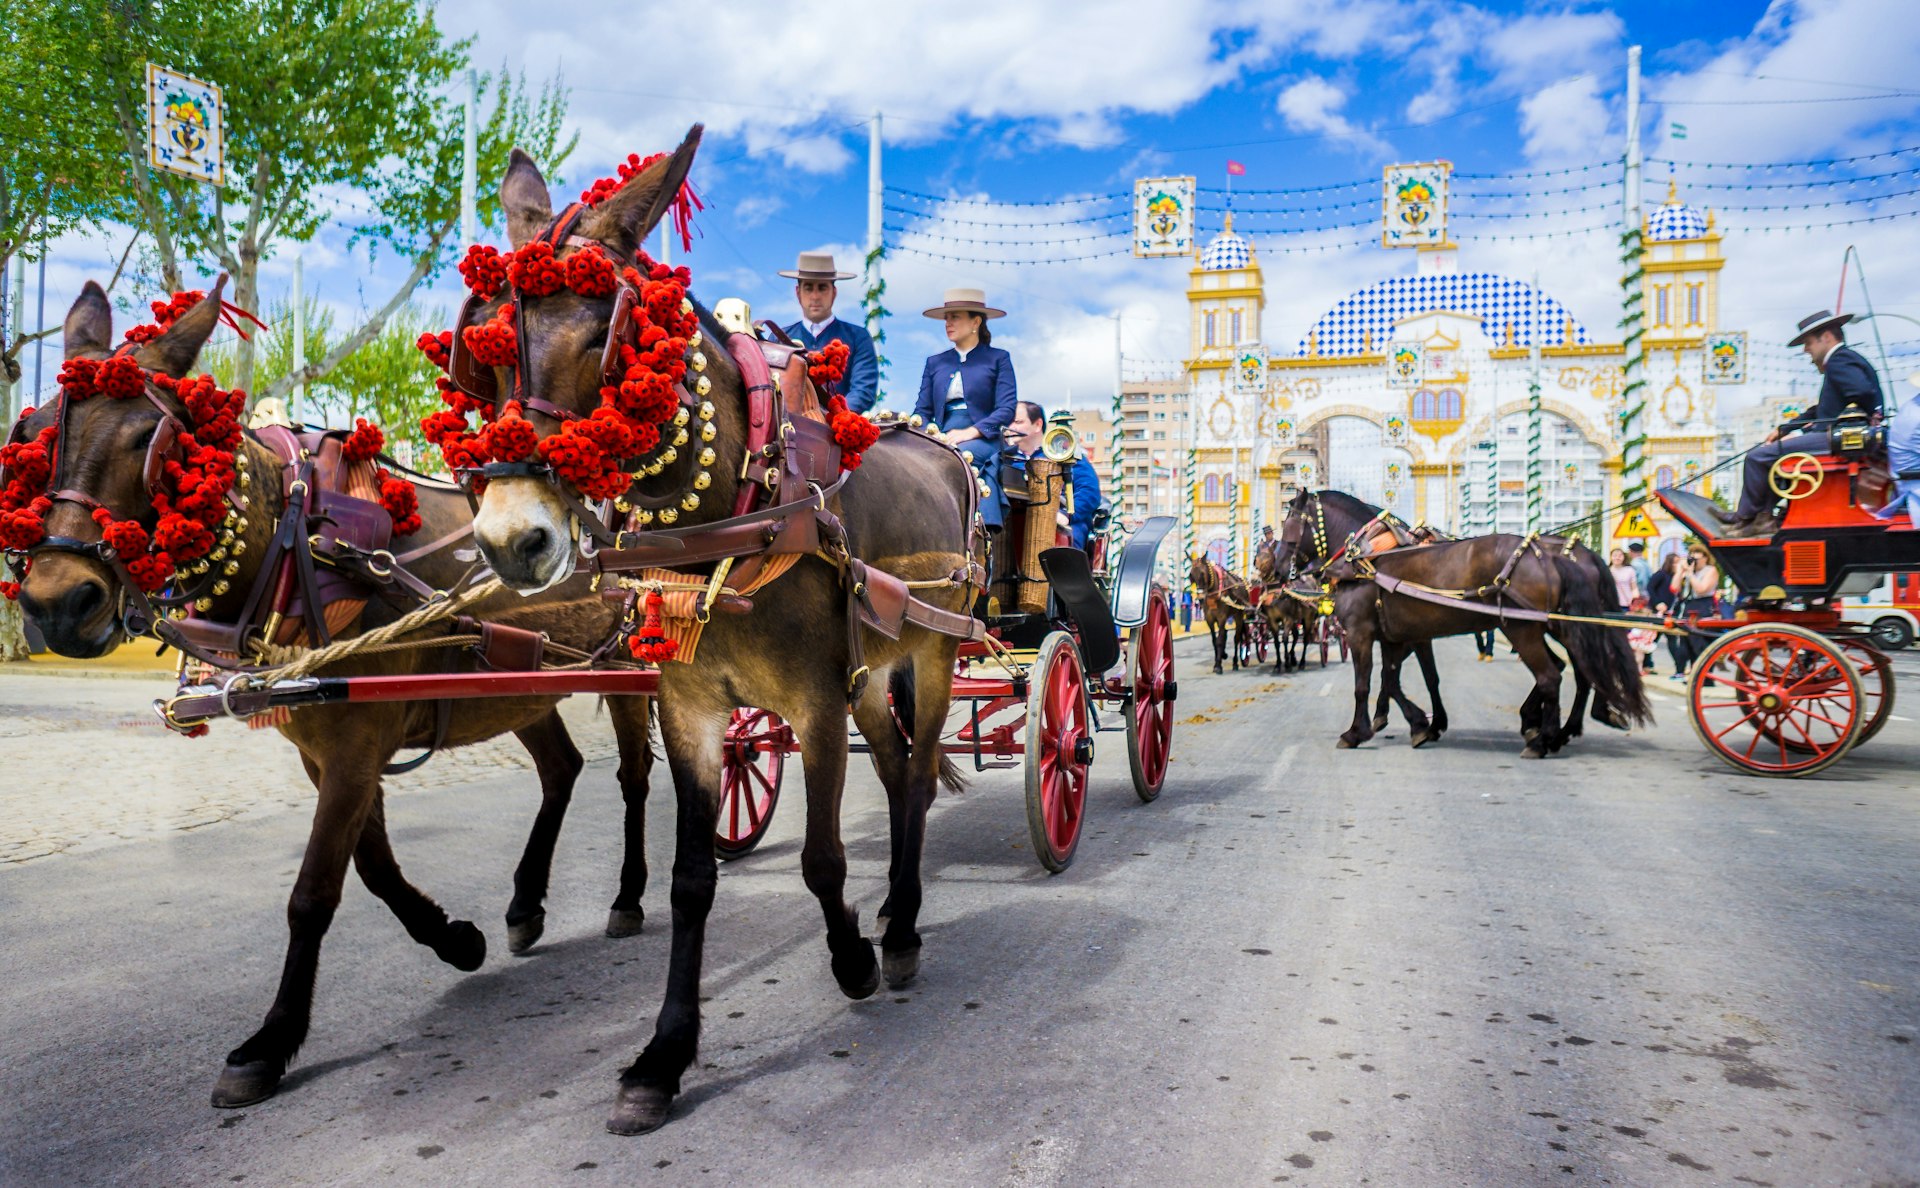 Two horses wearing red flowers on their bridles pull along a carriage carrying people in formal dress